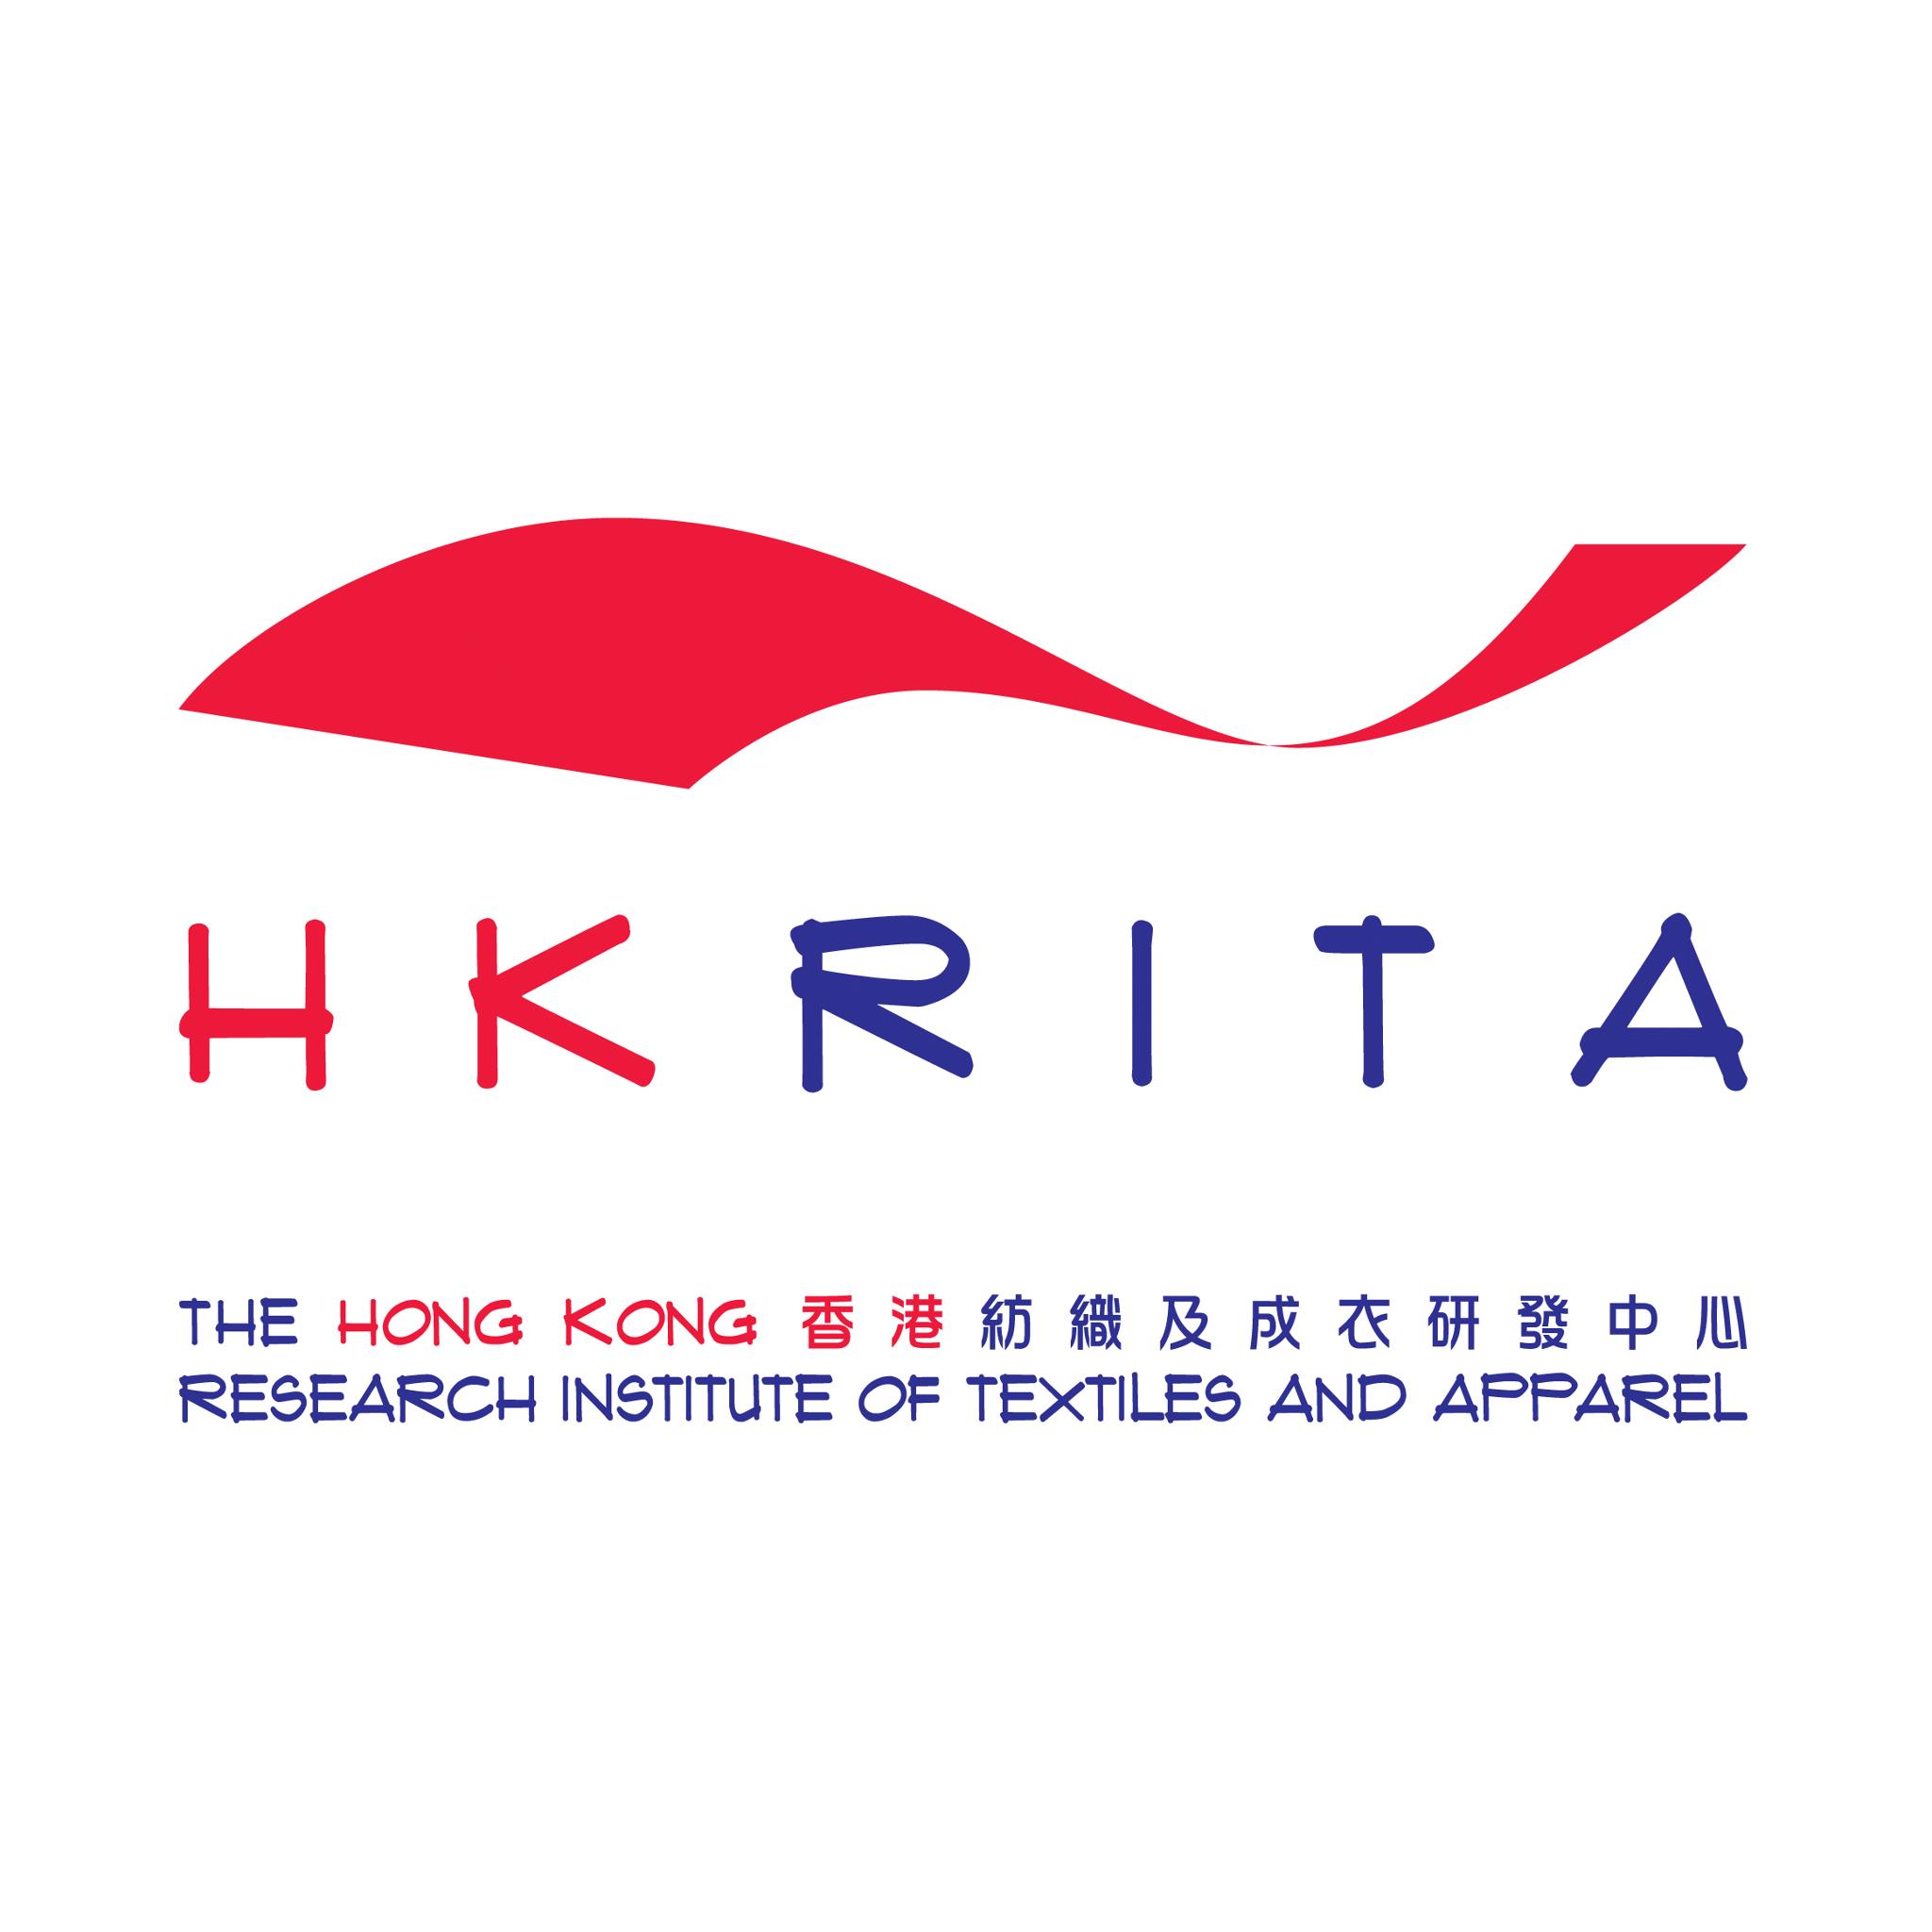 The Hong Kong Research Institute of Textiles and Apparel